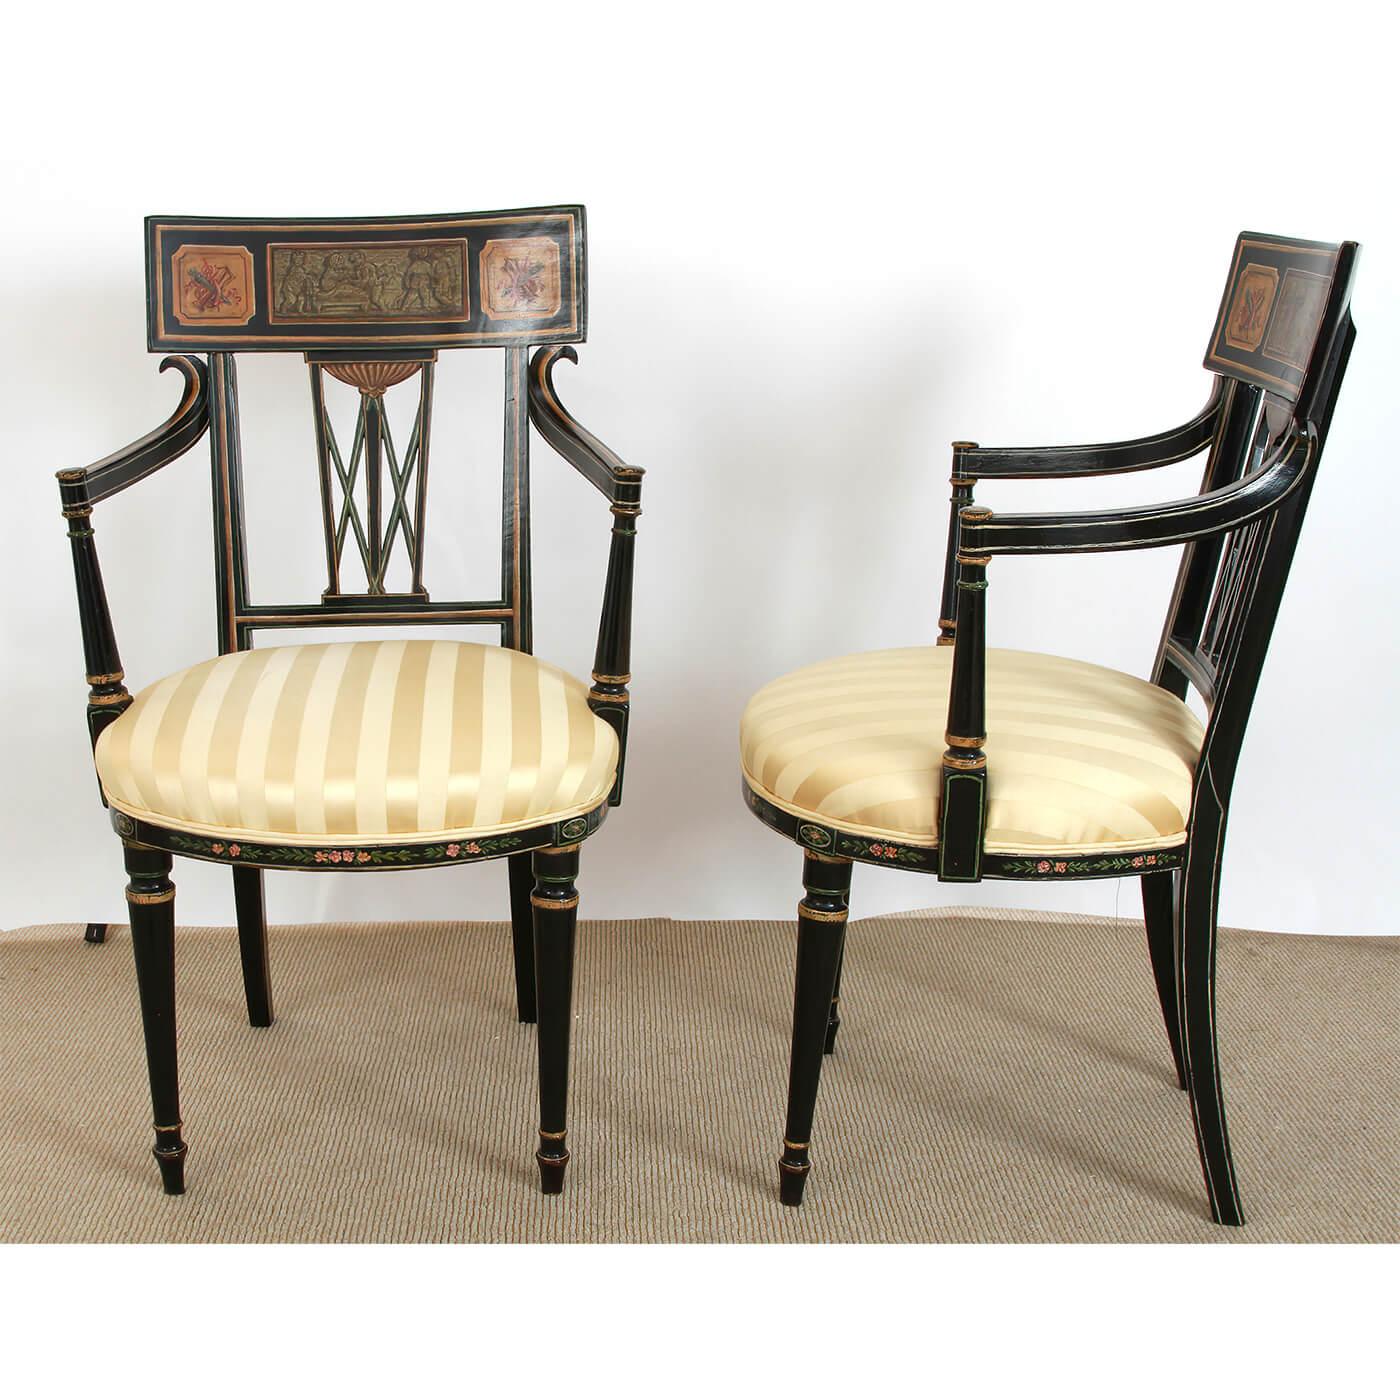 A Fine Pair of English Regency ebonized armchairs with classic painted panel splats with matching motifs and gilt decorations. Ca 1810

Dimensions: 21